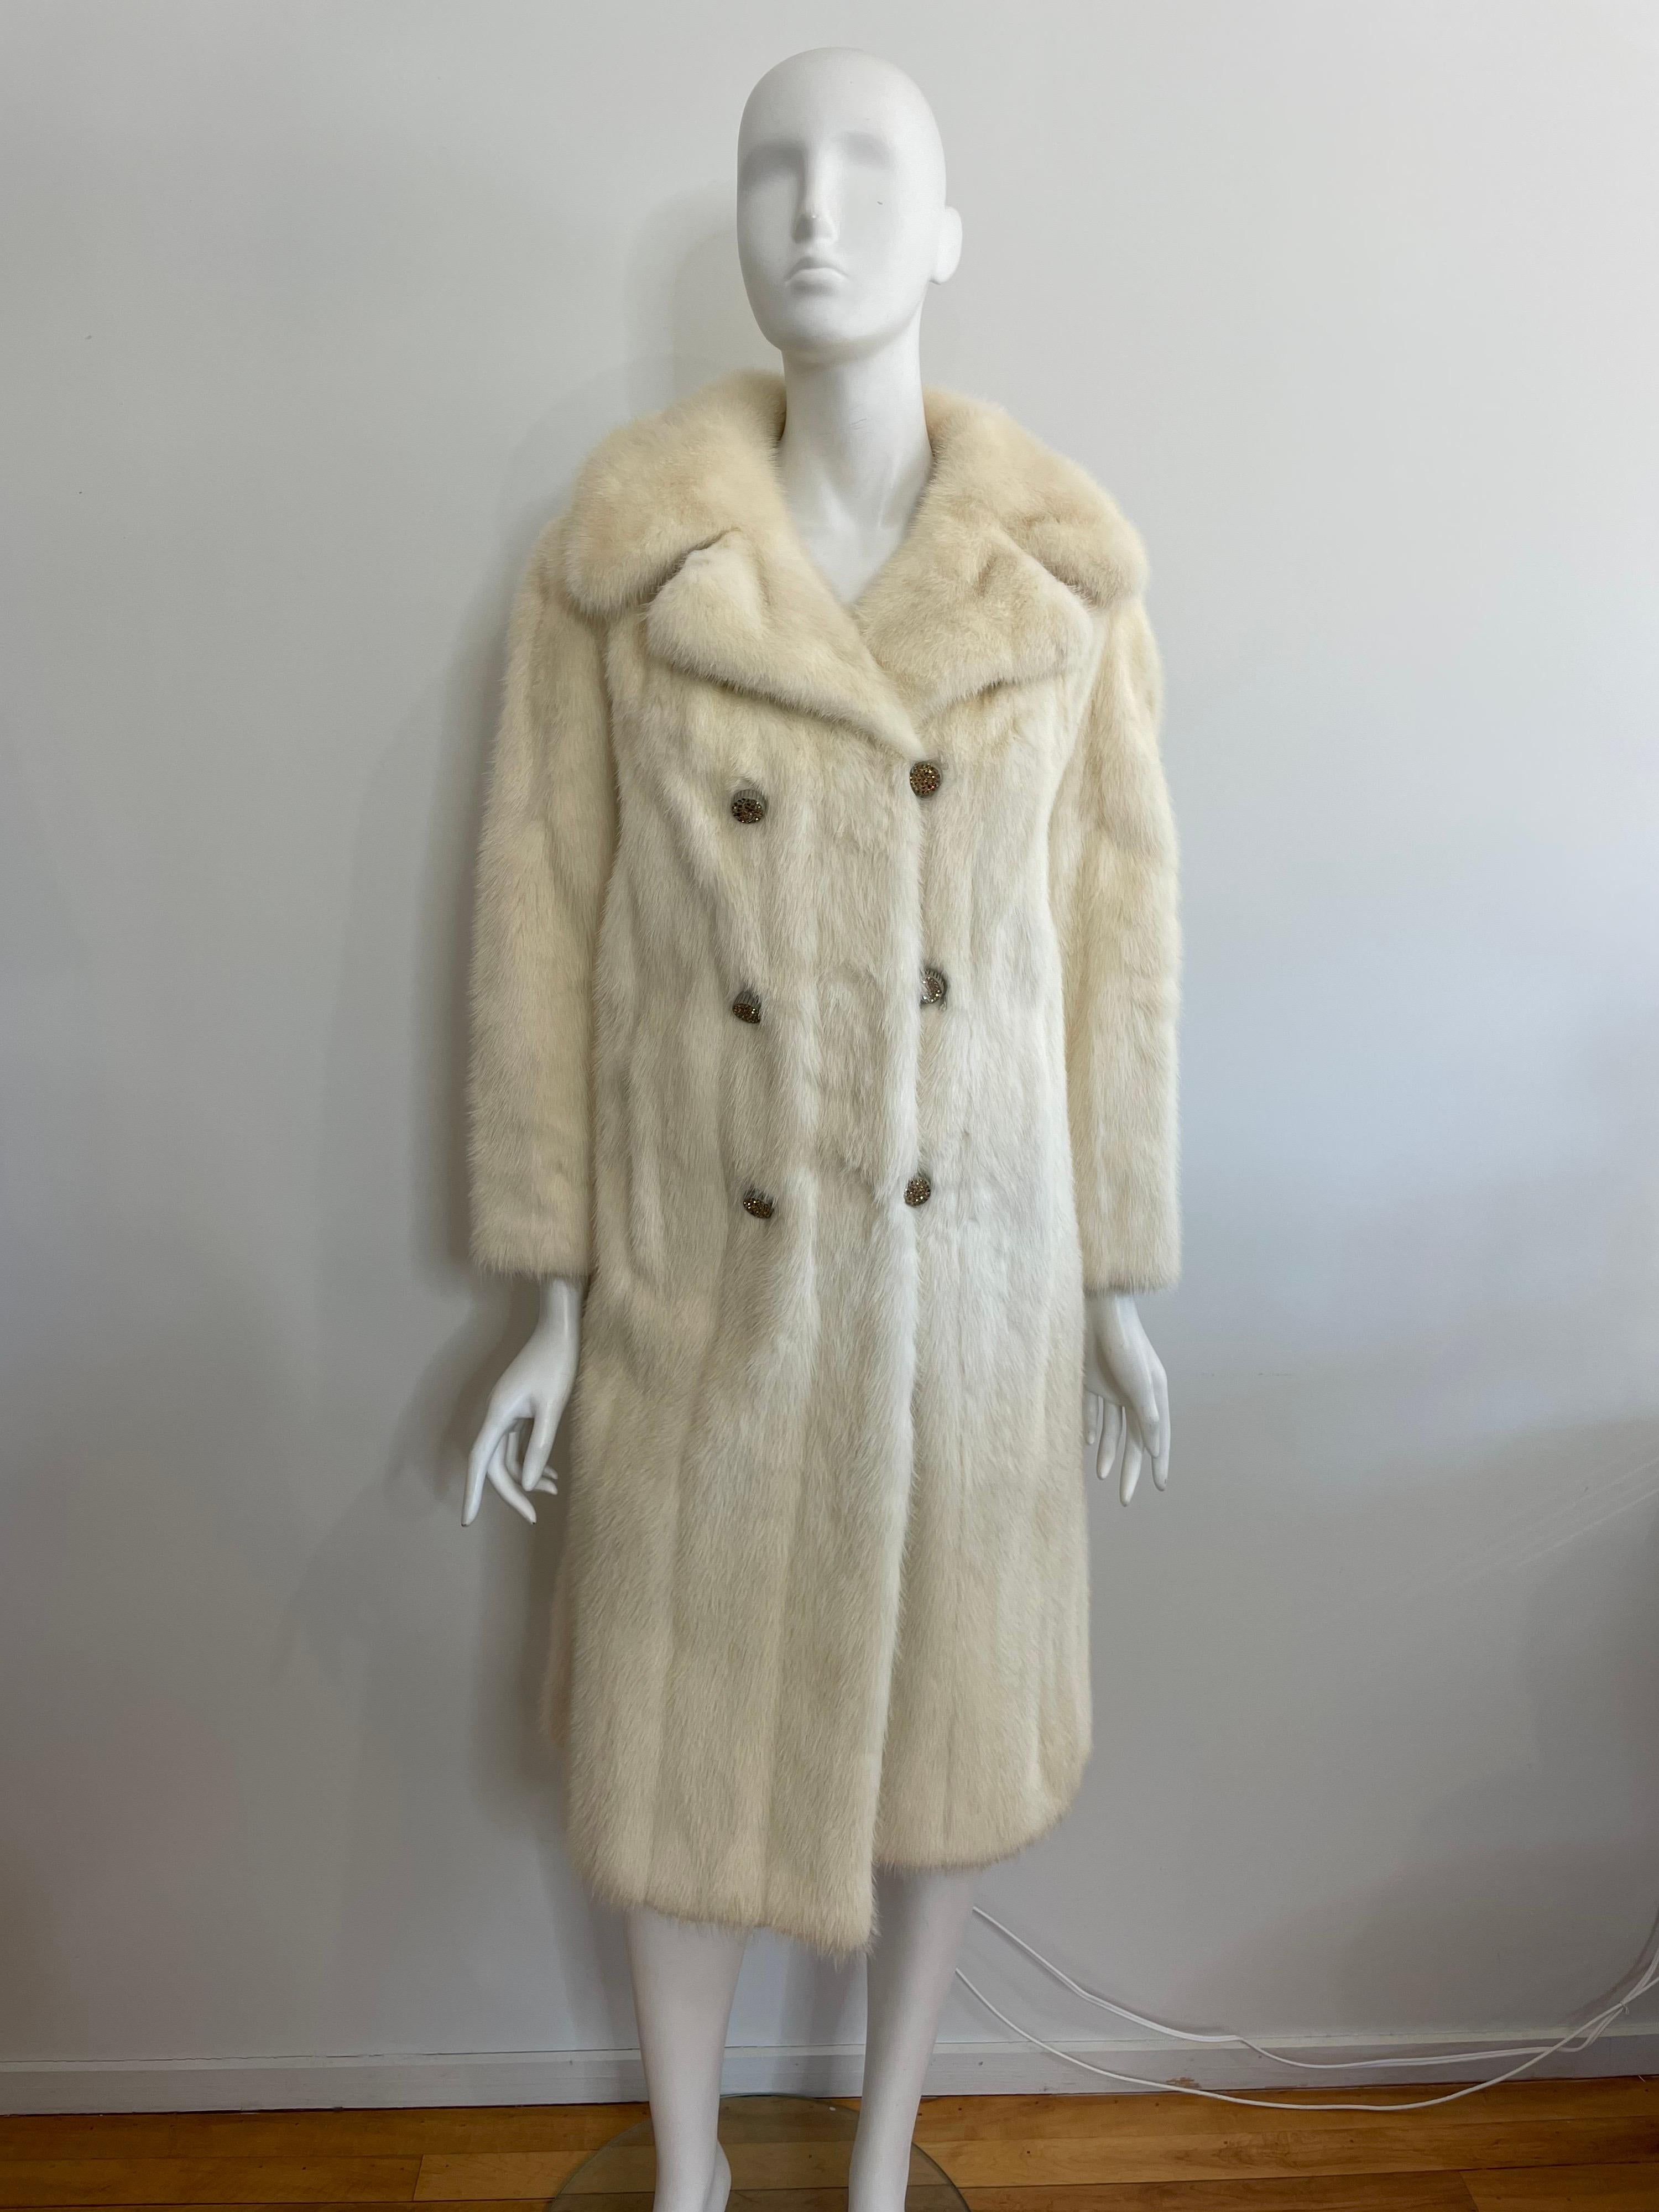 Soft and supple Ivory Mink. The buttons have some sparkle to them. A couple of buttons are missing a few stones. Classic Cut, timeless. 2 Slit side pockets. Please compare the measurements to something you own that fits you. Measurements * Up to 38